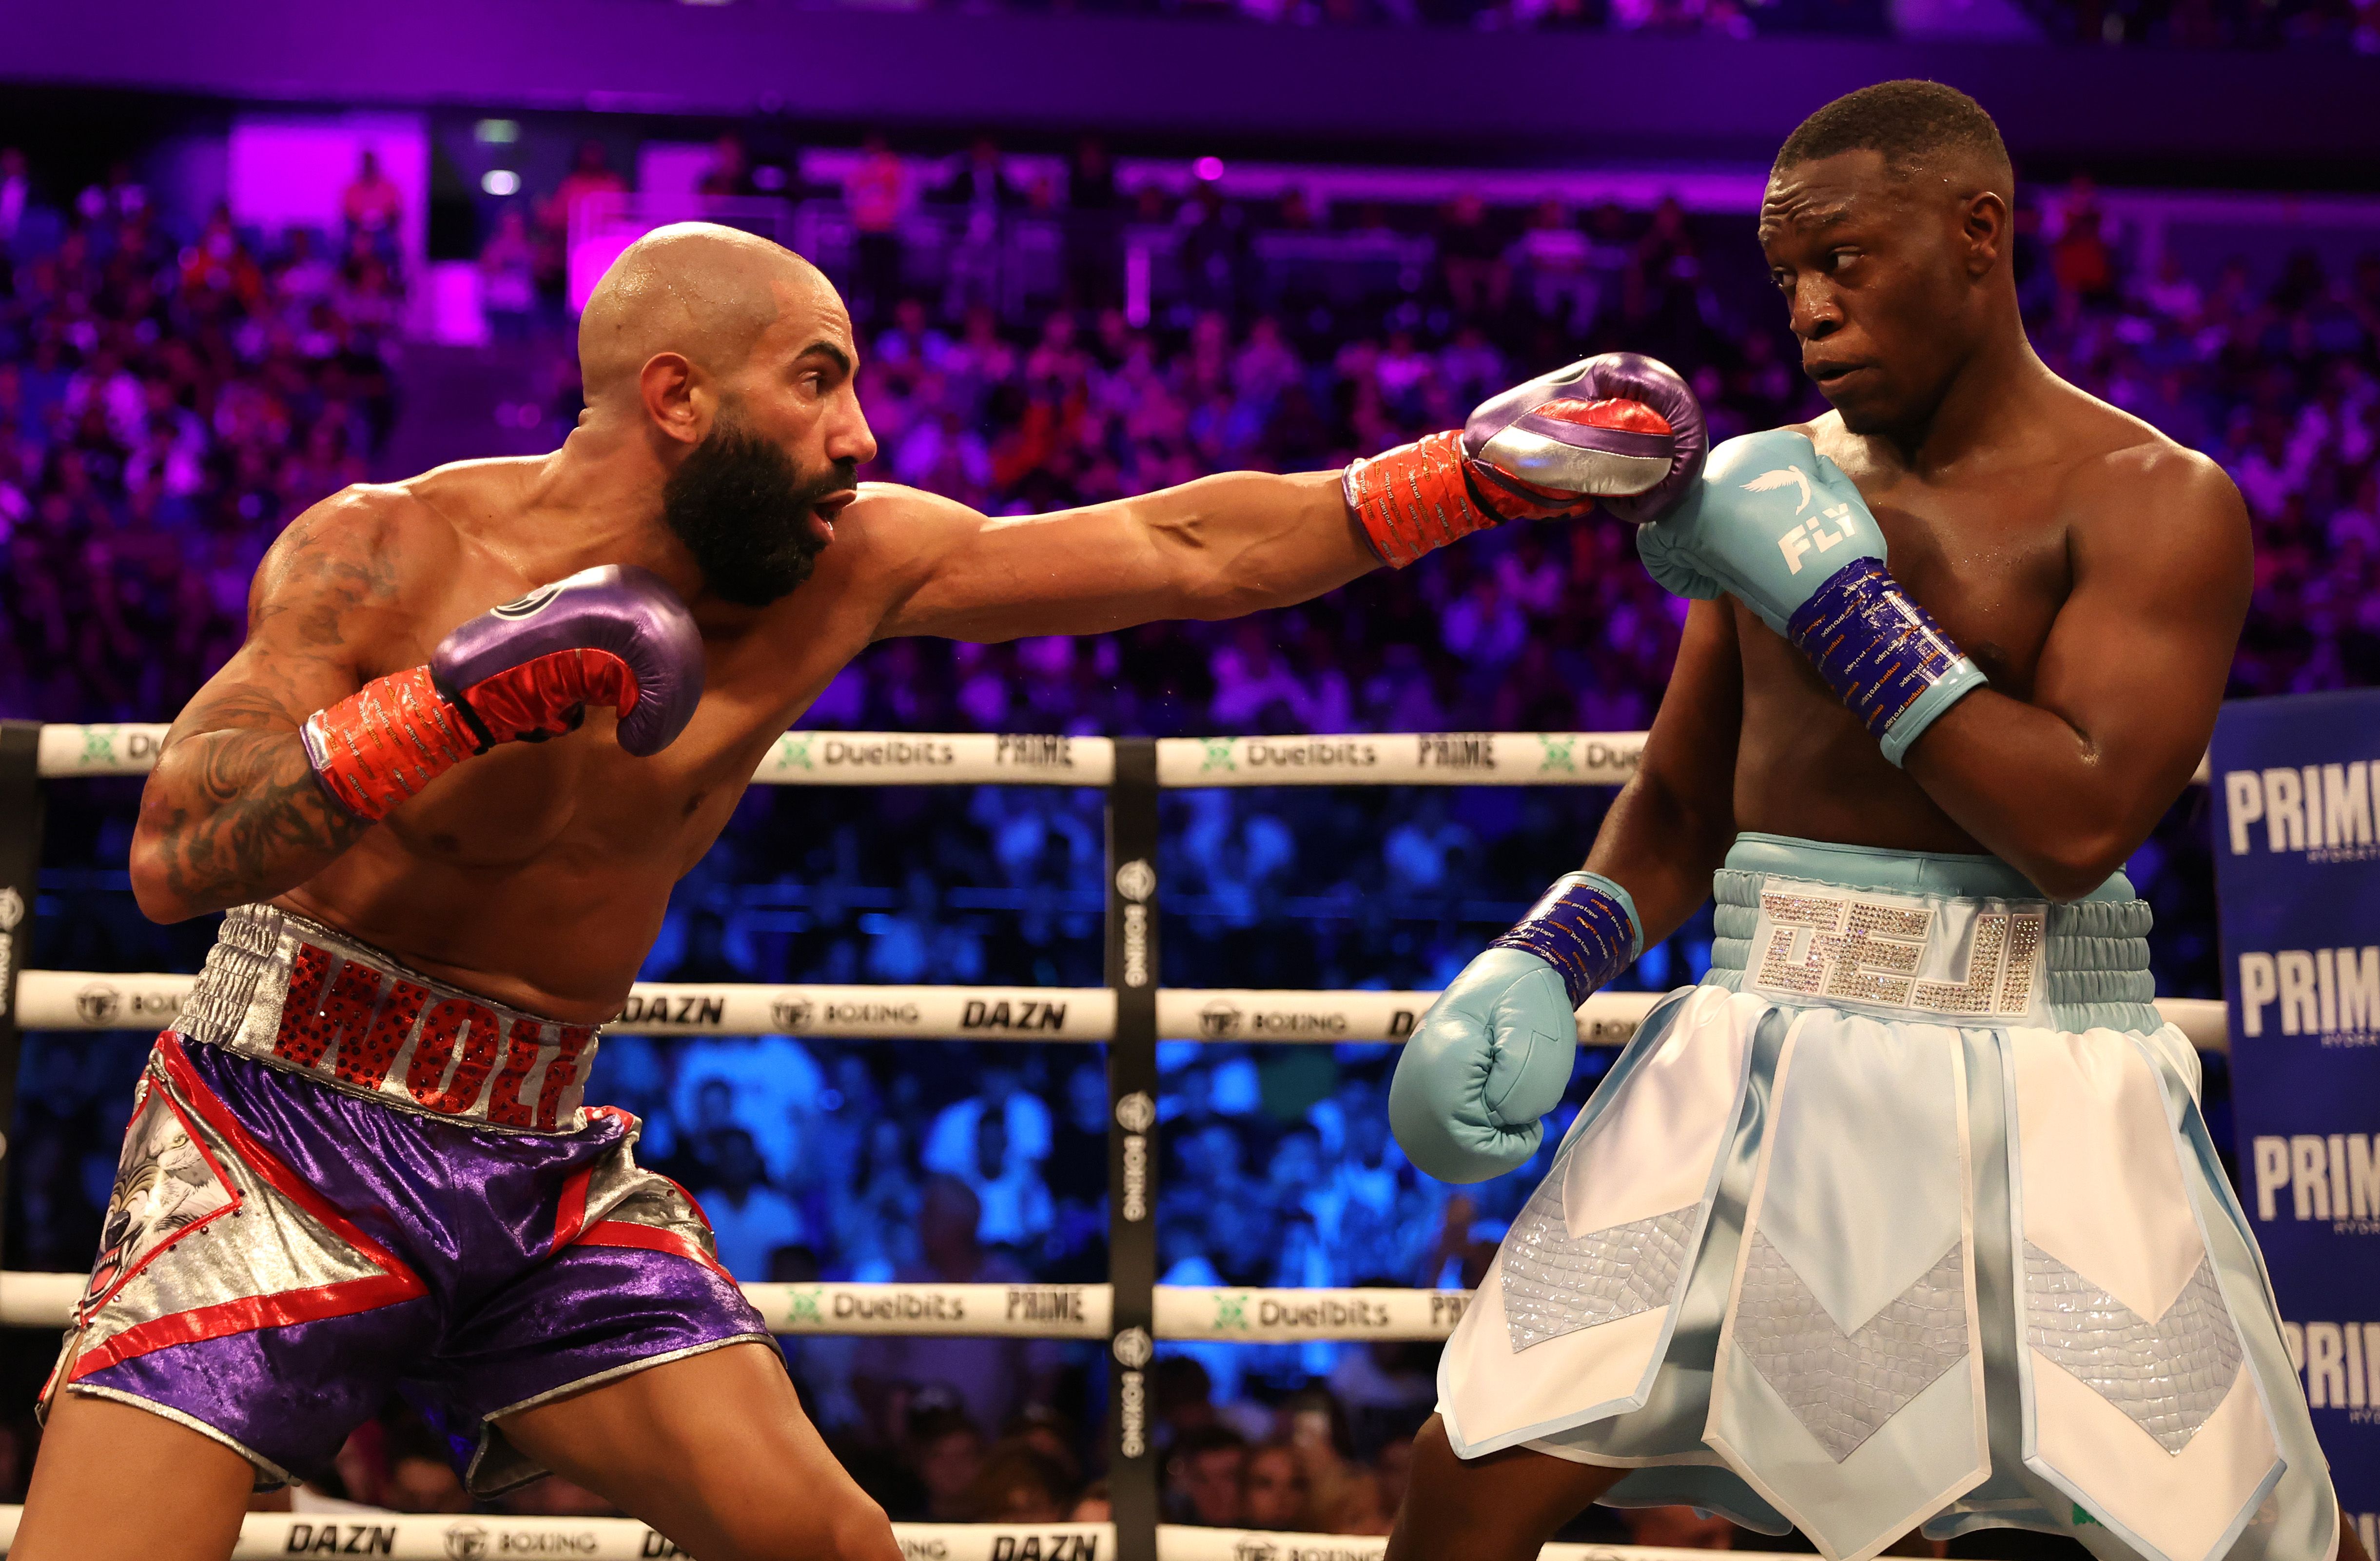 Deji (R) throws a punch during his Light Heavyweight Bout against Fousey (L) at The O2 Arena on August 27, 2022 in London, England